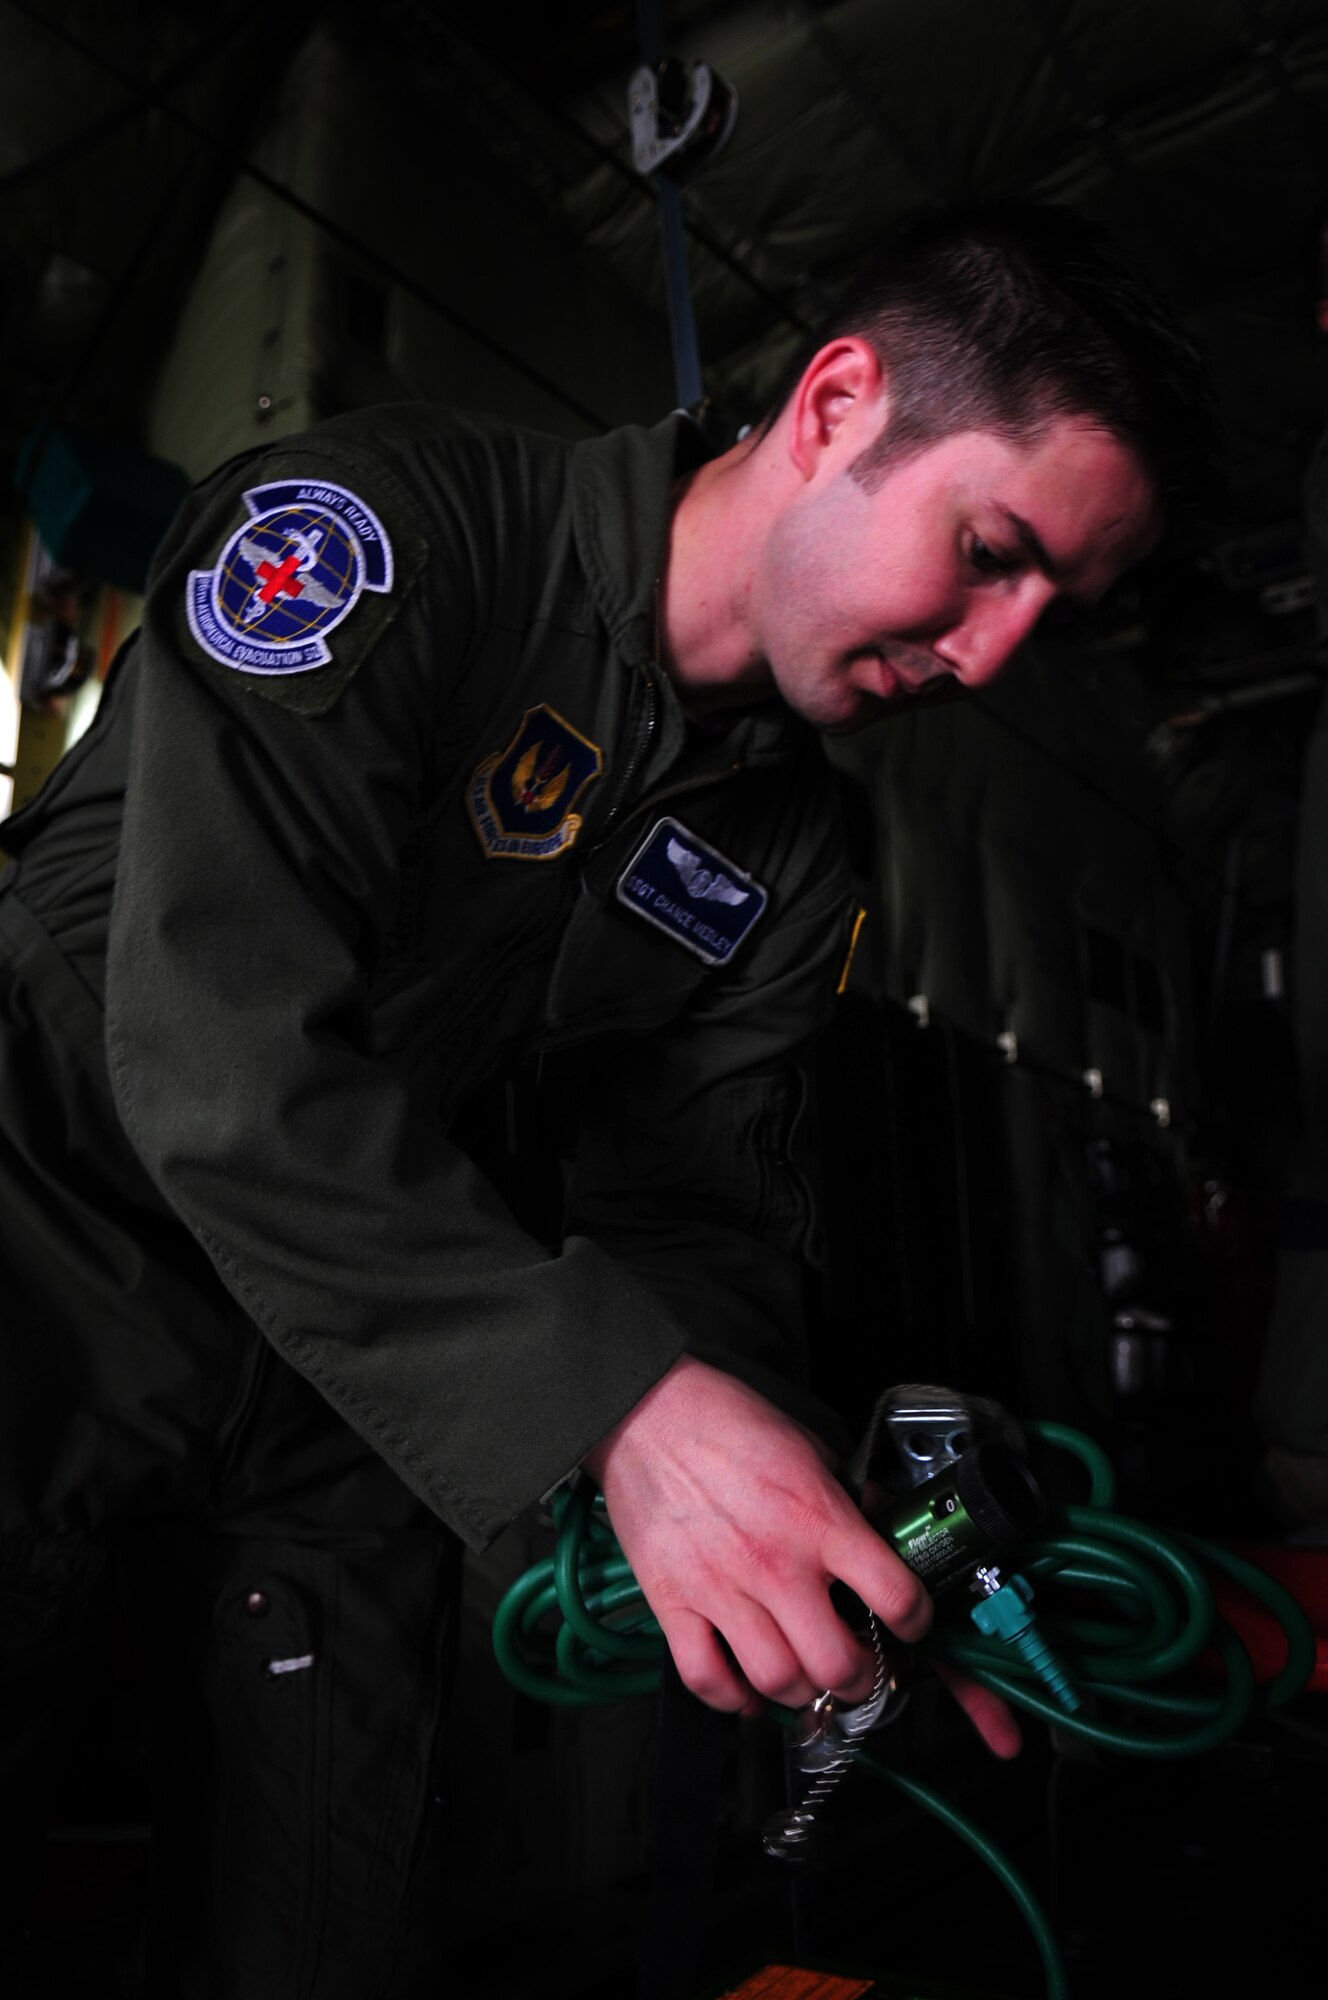 U.S. Air Force Staff Sgt. Chance Medley, 86th Aeromedical Evacuation Squadron medical evacuation technician, prepares an oxygen supply unit prior to conducting training with the Romanian Air Force counter parts on aeromedical evacuation equipment and procedures on a C-130J during the joint exercise Carpathian Summer, Otopeni Airlift Base, Romania, May 12, 2010. Carpathian Summer 2010 was an exercise in which the Romanian Air Force invited members of the U.S. military to train with them on their soil and air space, to observe, firsthand, operations in action. This exercise was designed to build partnerships between these nations in an effort to work together more efficiently during real world scenarios. (U.S. Air Force Photo by Staff Sgt. Jocelyn Rich)